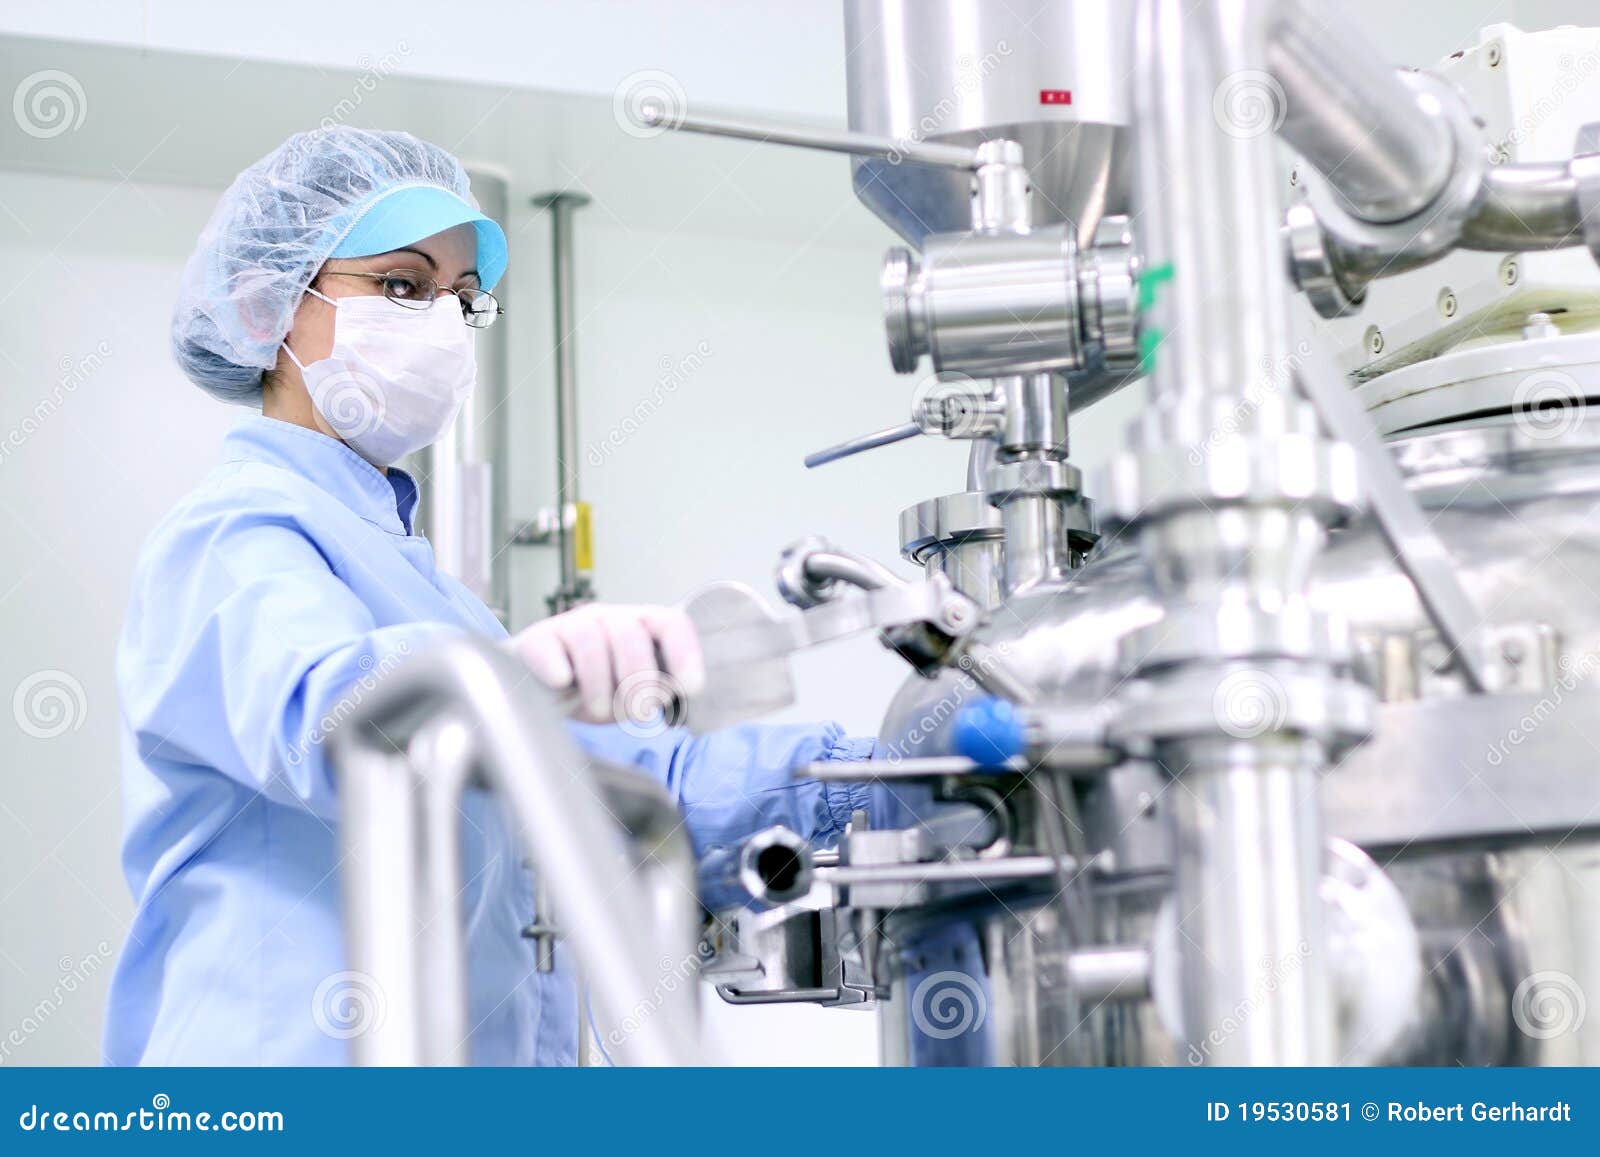 pharmaceutical worker at work